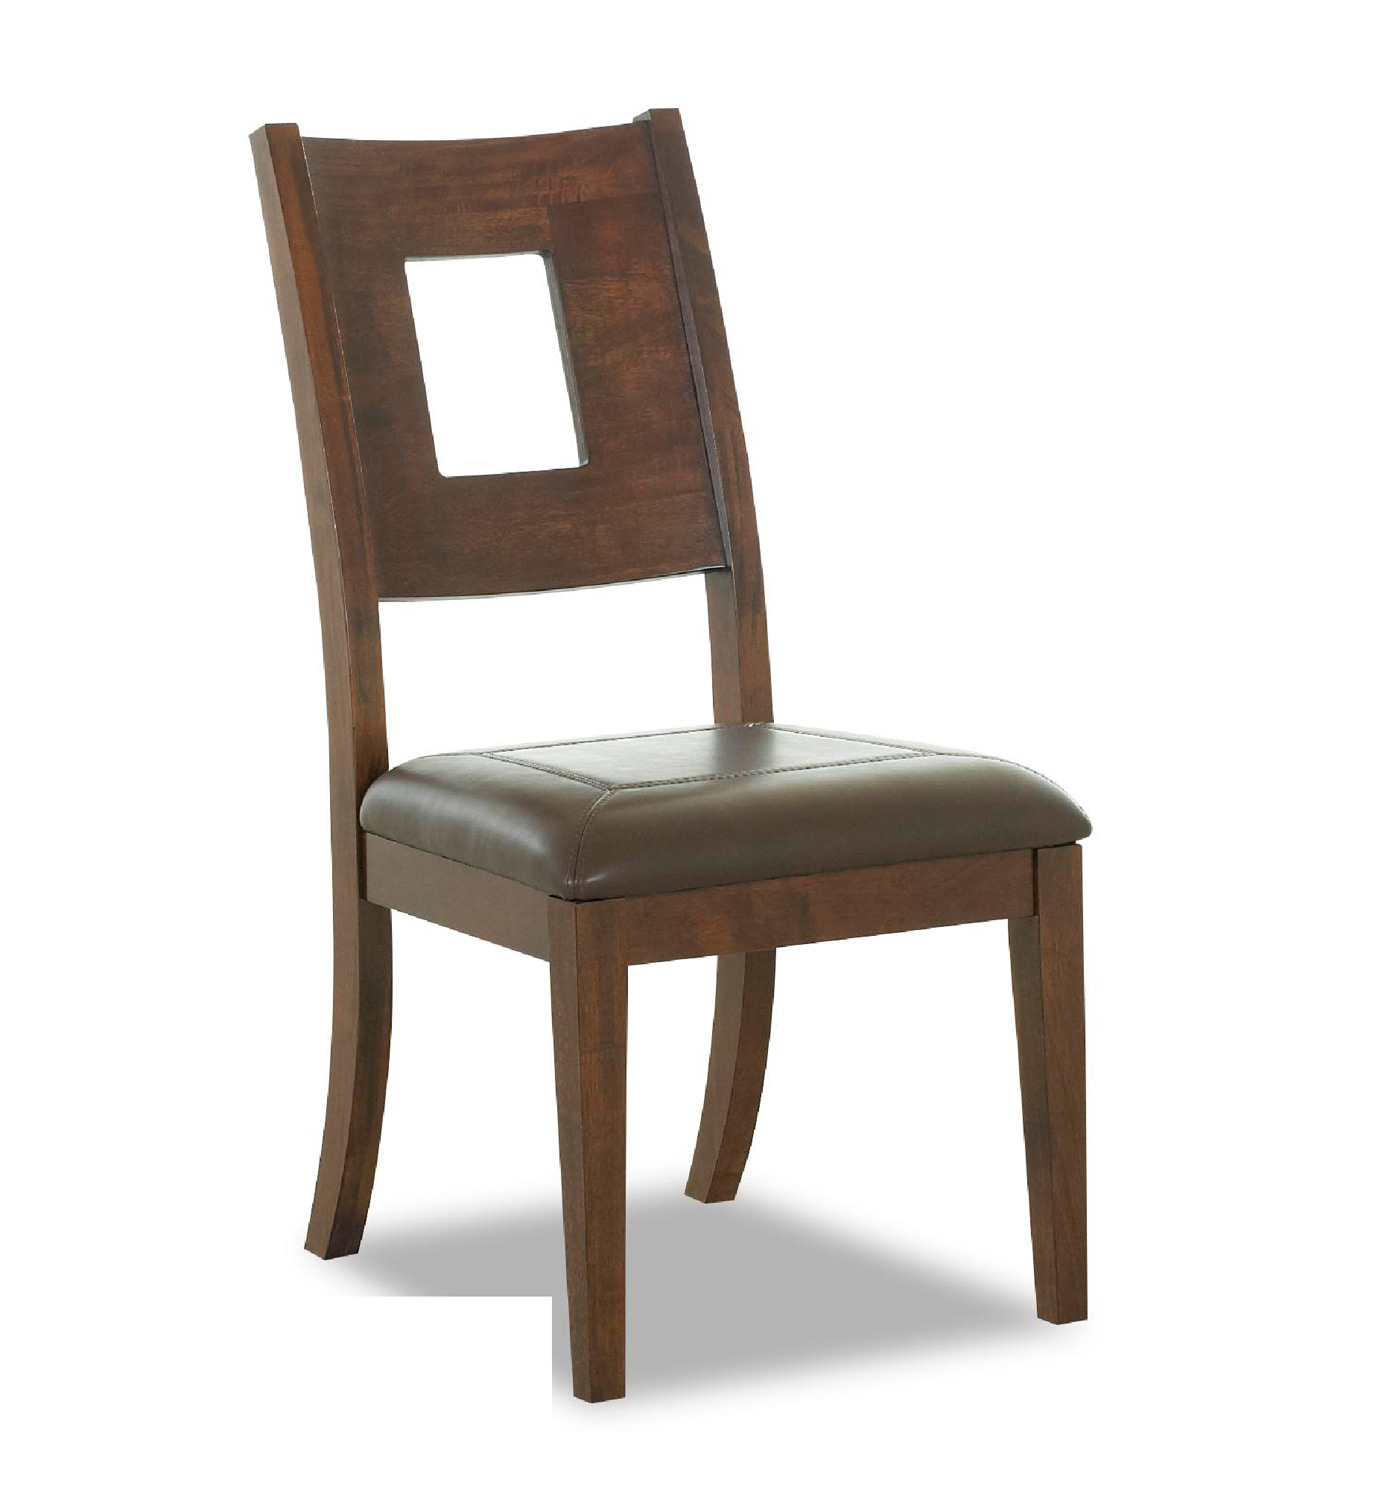 Klaussner Carturra Side Chair